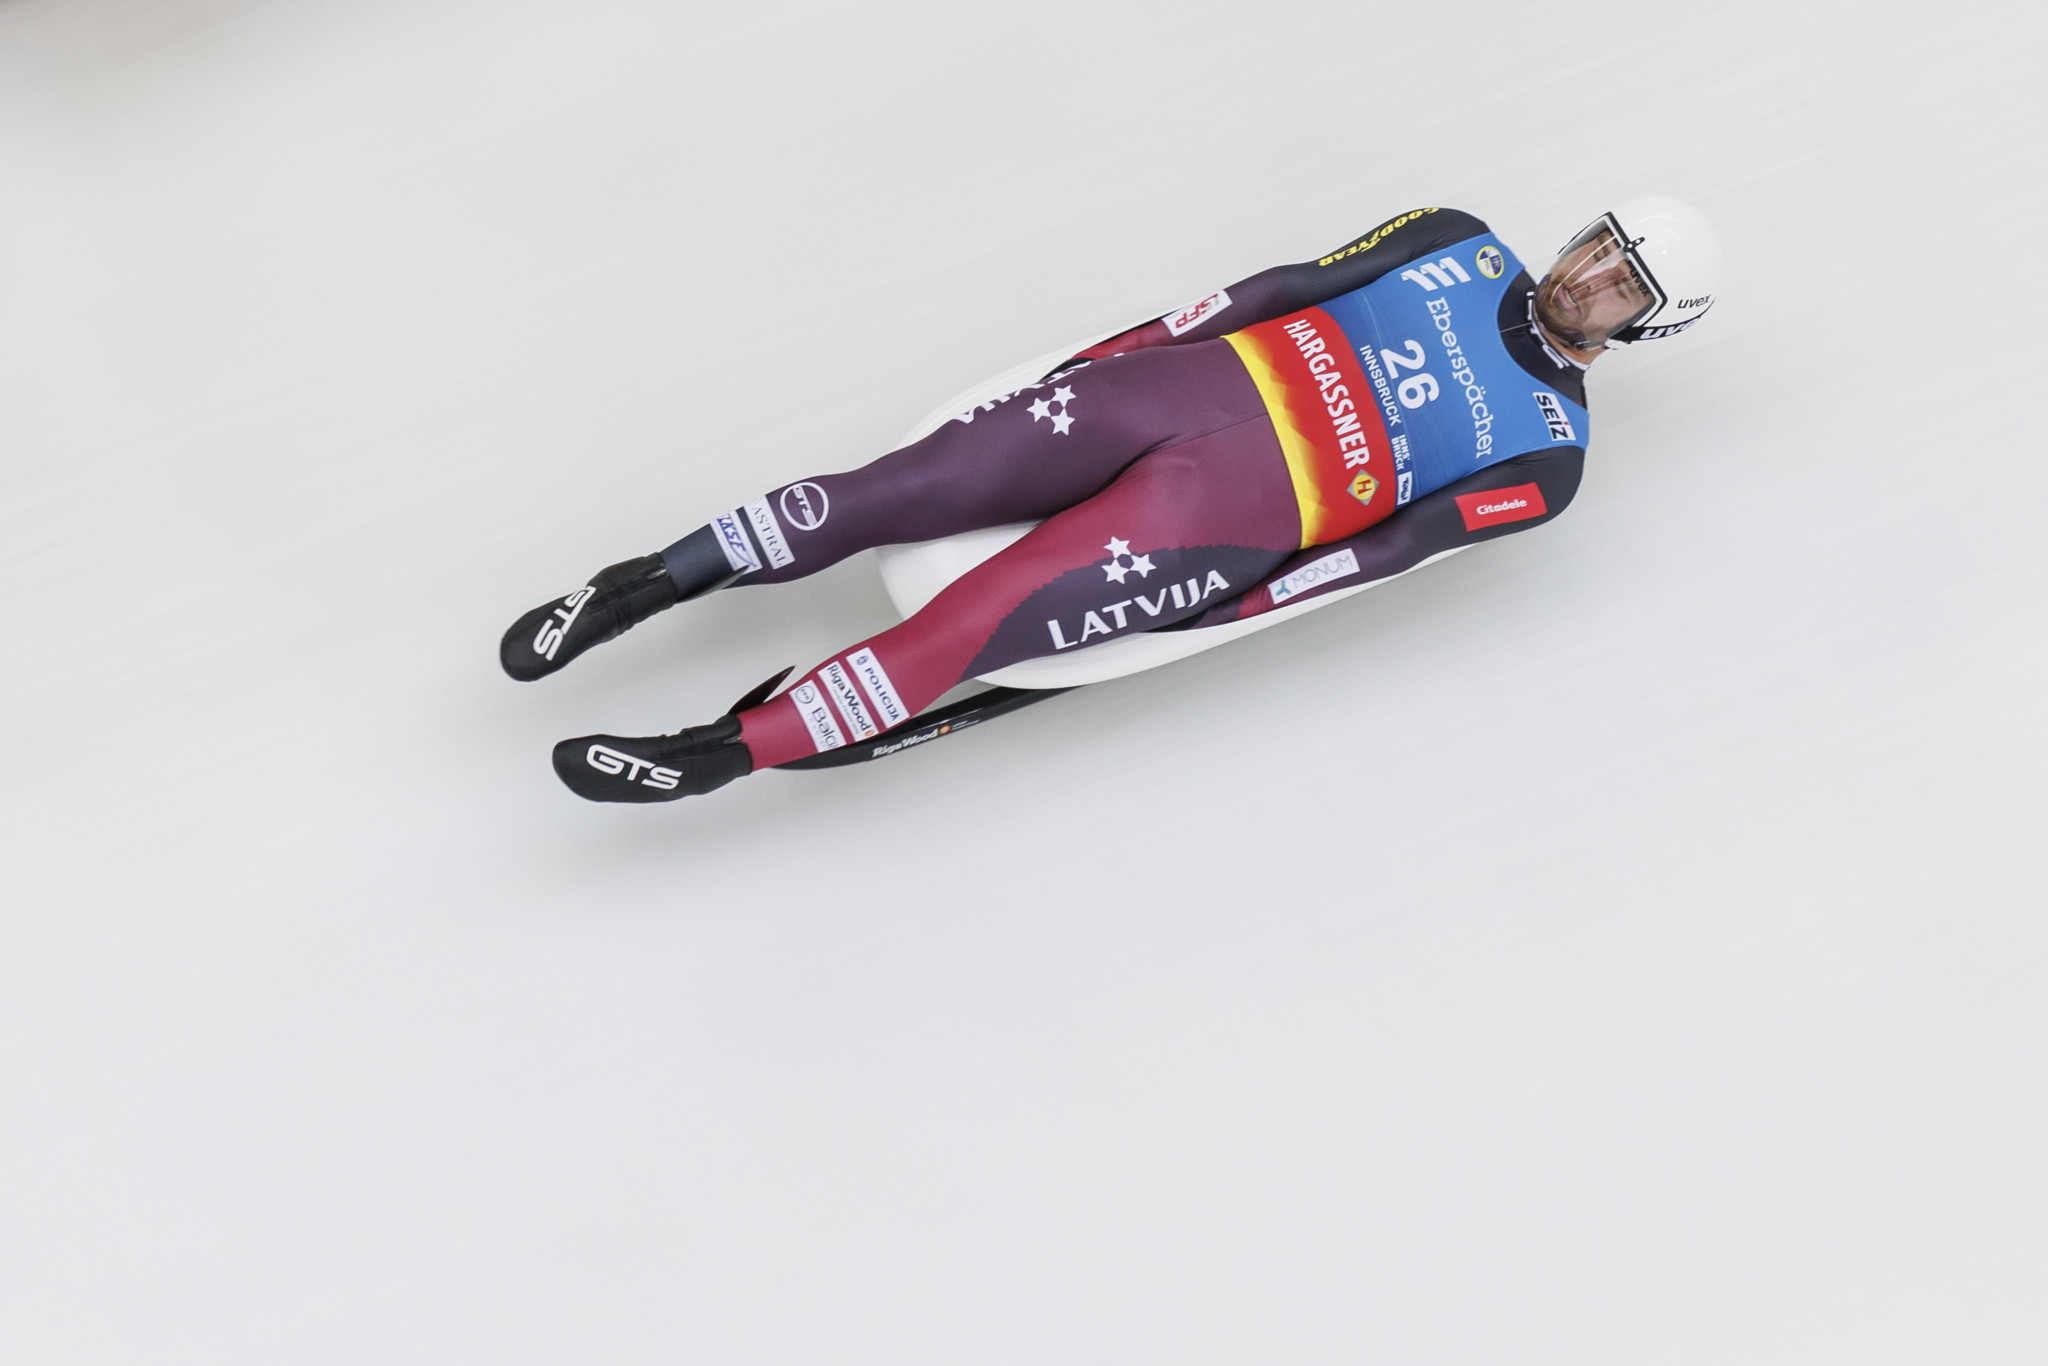 Kristers Aparjods enjoyed individual and team success at the Luge World Cup in Sigulda ©Getty Images